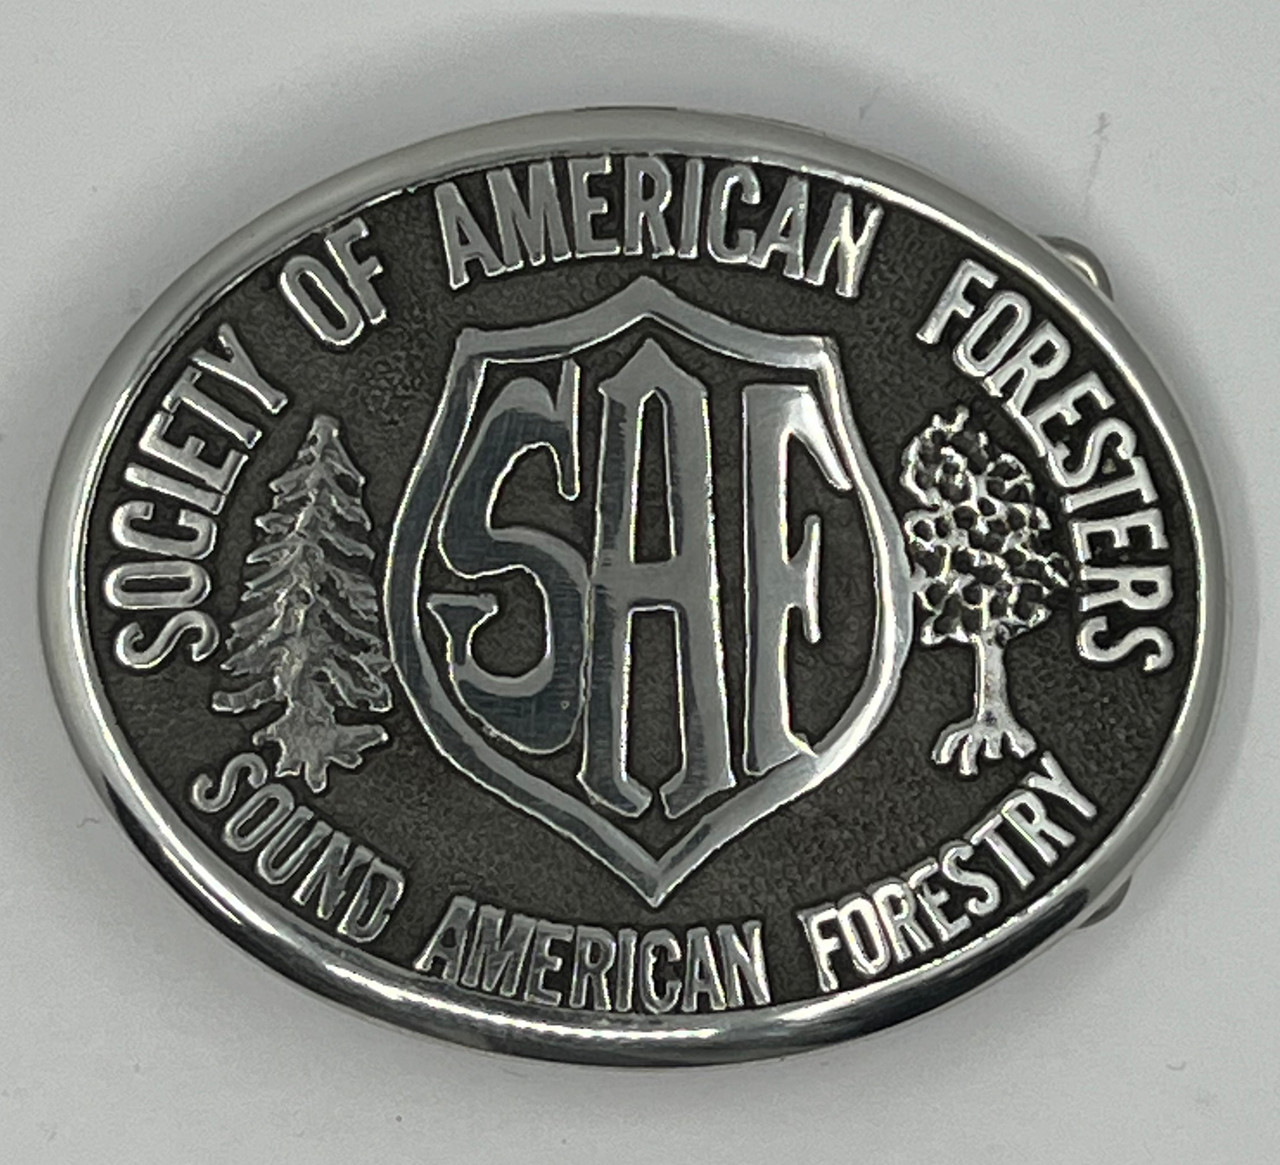 Society of American Foresters (old) Buckle